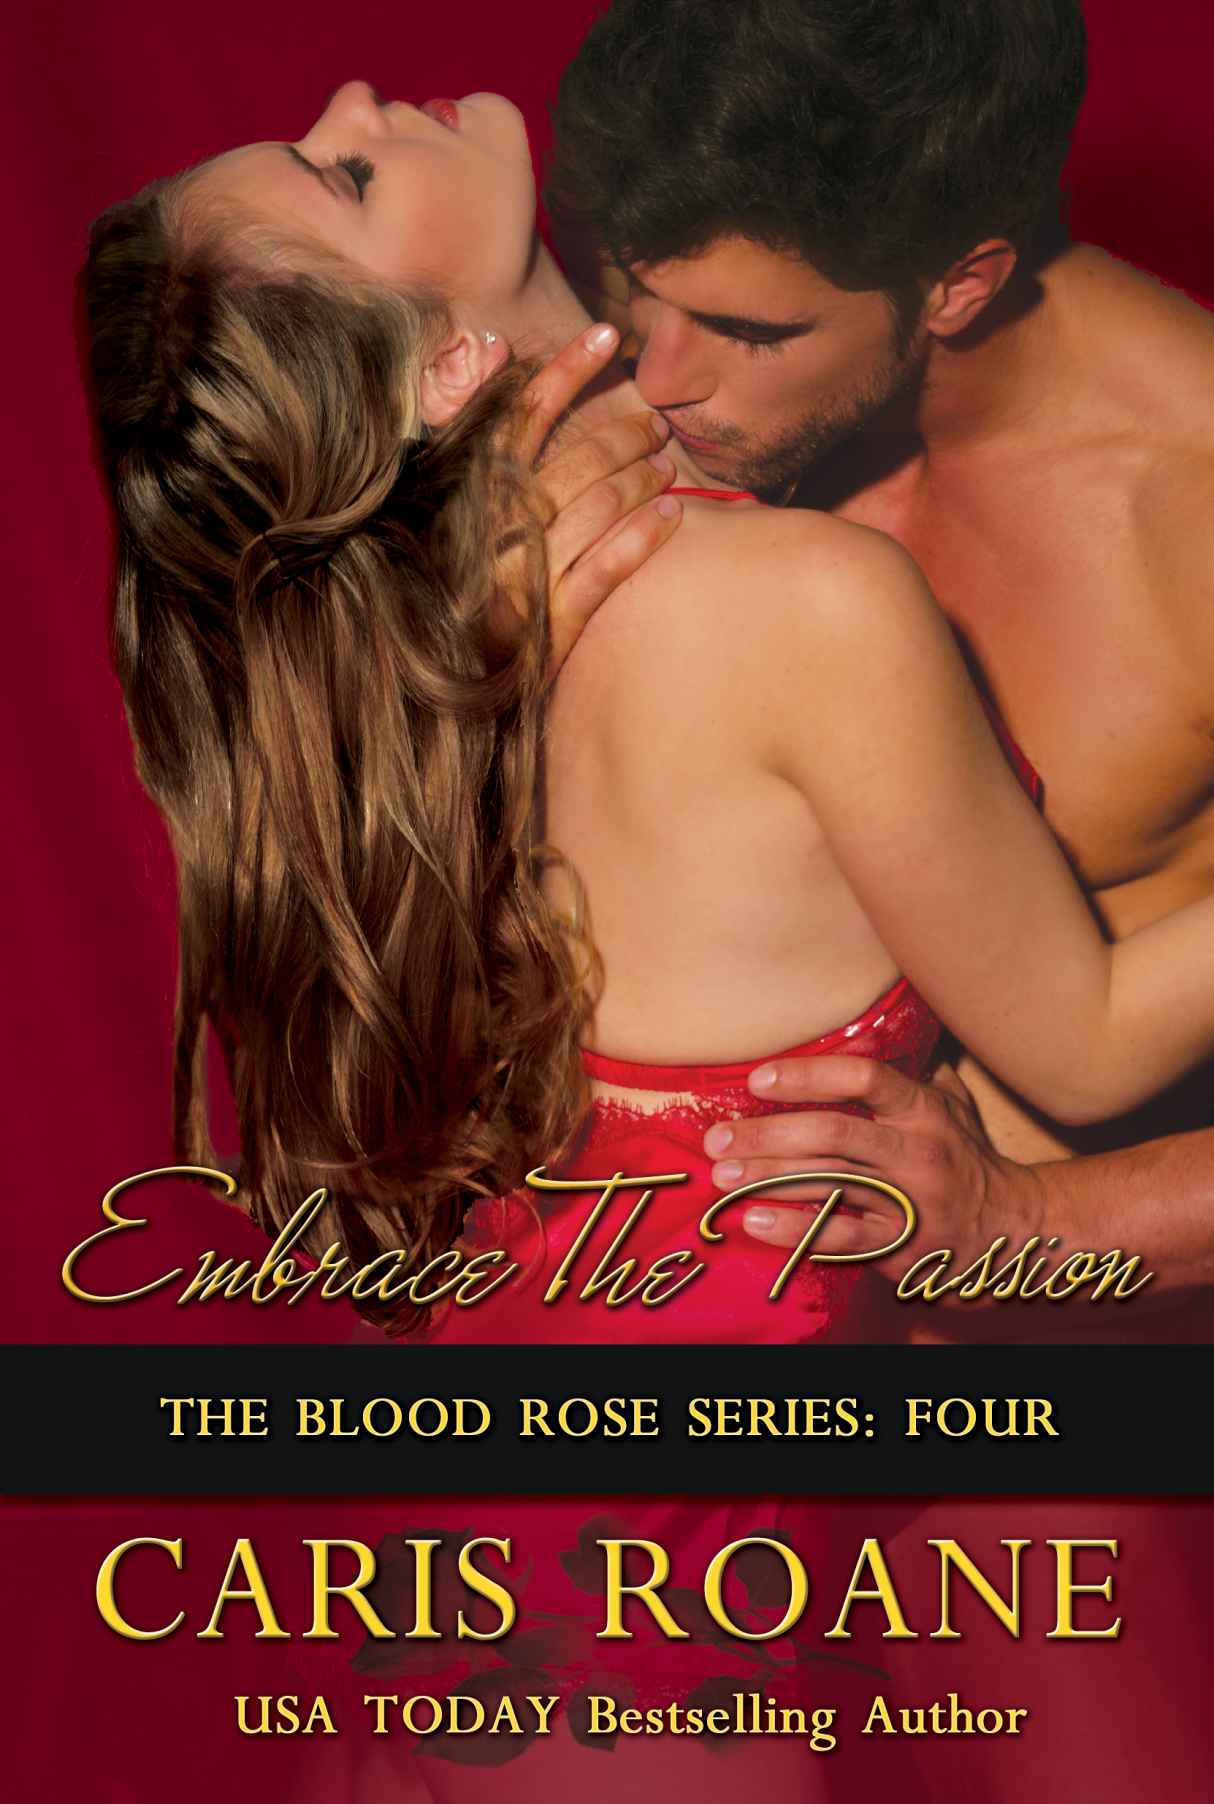 Embrace the Passion (The Blood Rose Series) by Caris Roane